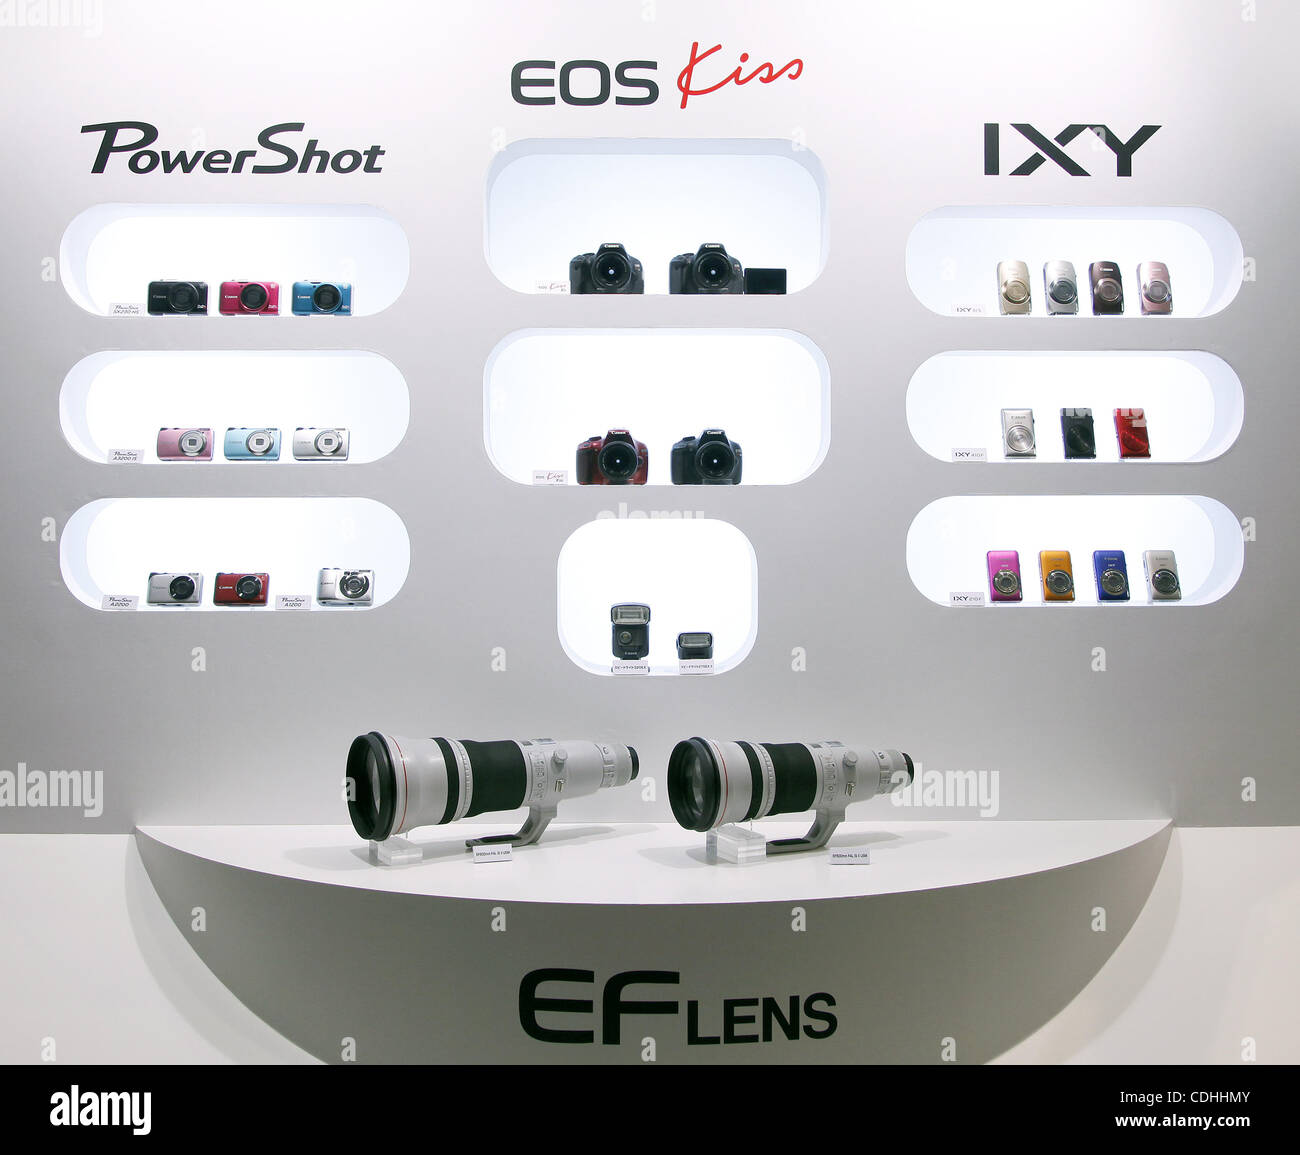 Feb. 7, 2011 - Tokyo, Japan - Canon today introduced their new digital camera products including single-lens reflex 'EOS Kiss X5', new lineups of compact camera 'IXY' series and telescopic lens 'EF500mm F4L IS II USM' and 'EF600mm F4L IS II USM'. The 500mm and 600mm tele lens will be released to the Stock Photo